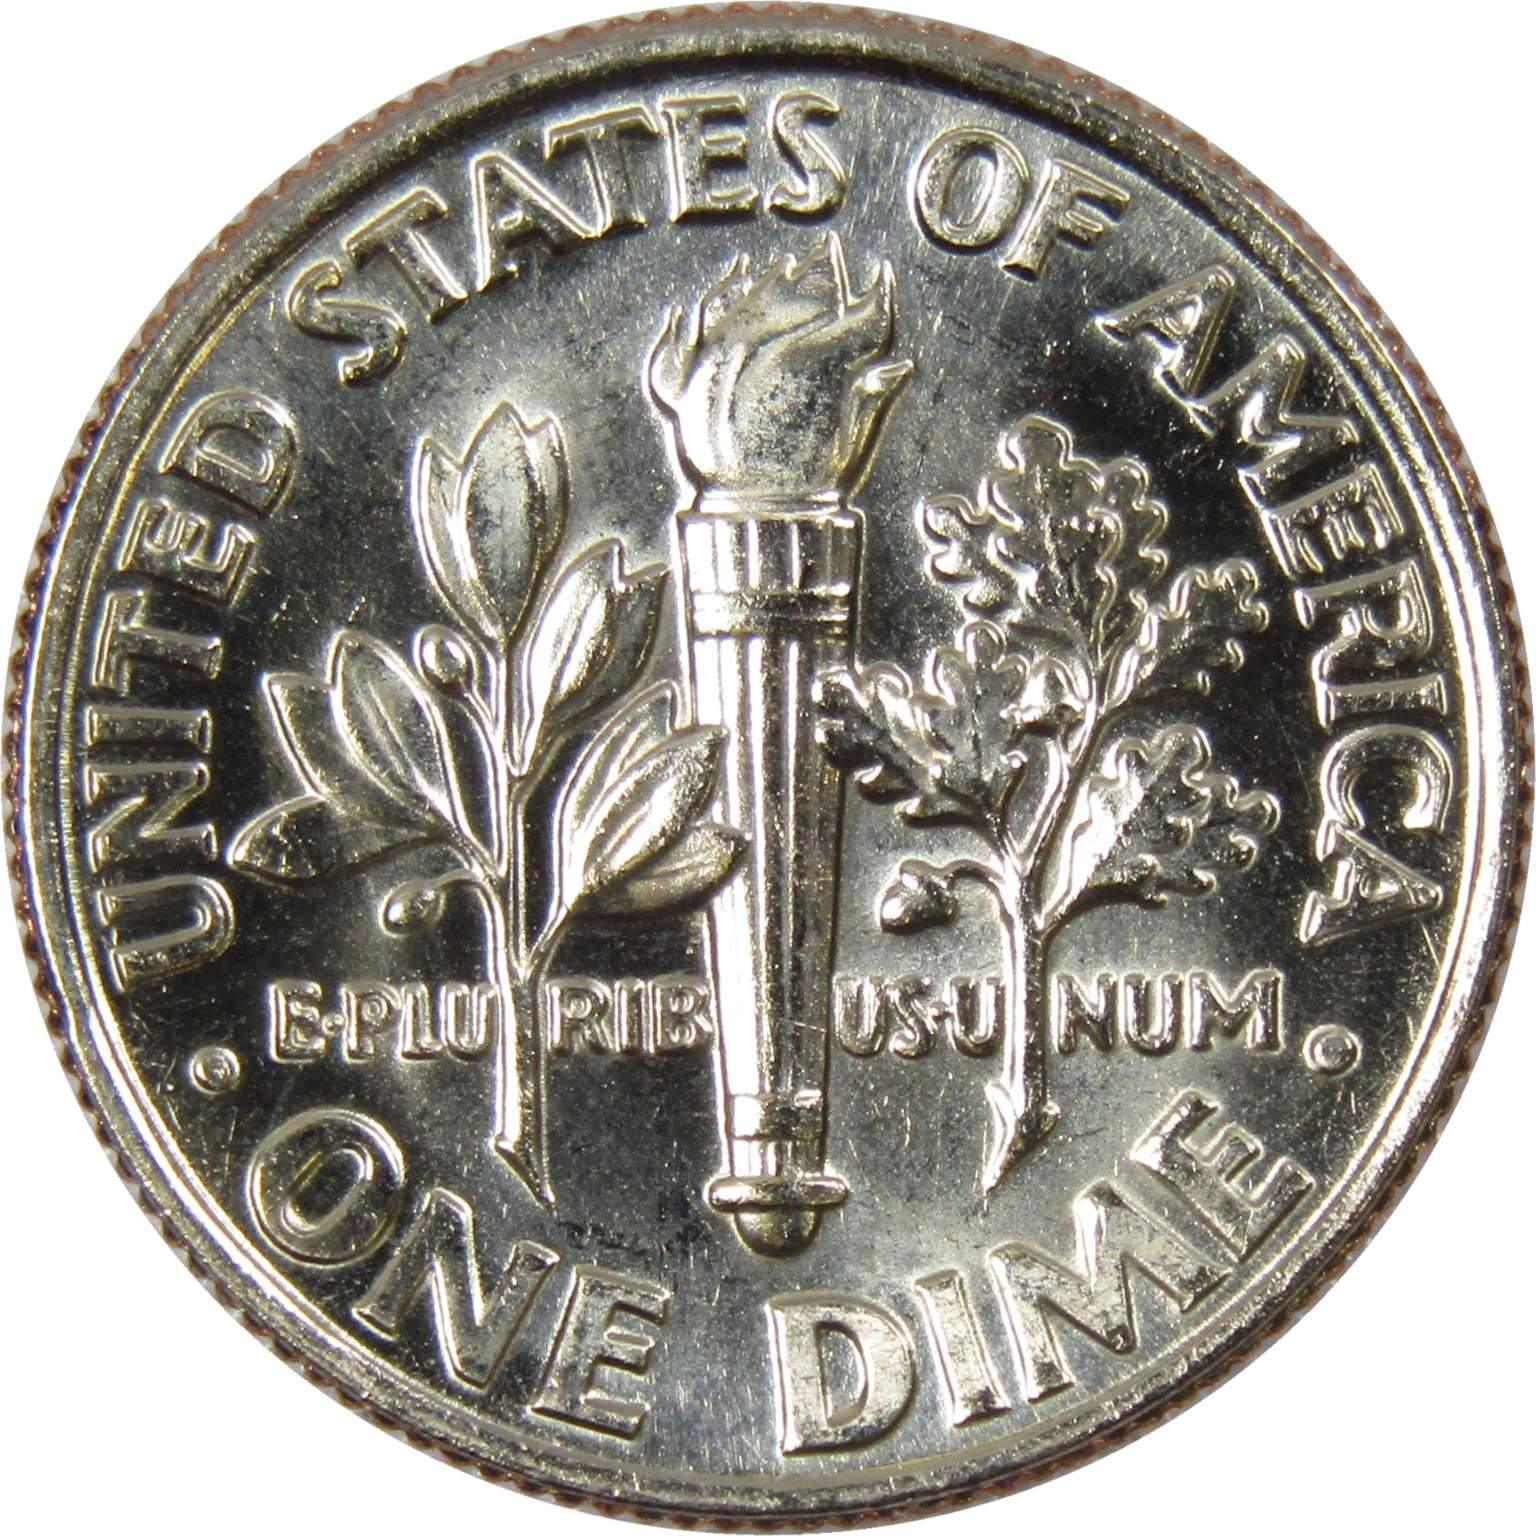 1990 P Roosevelt Dime BU Uncirculated Mint State 10c US Coin Collectible